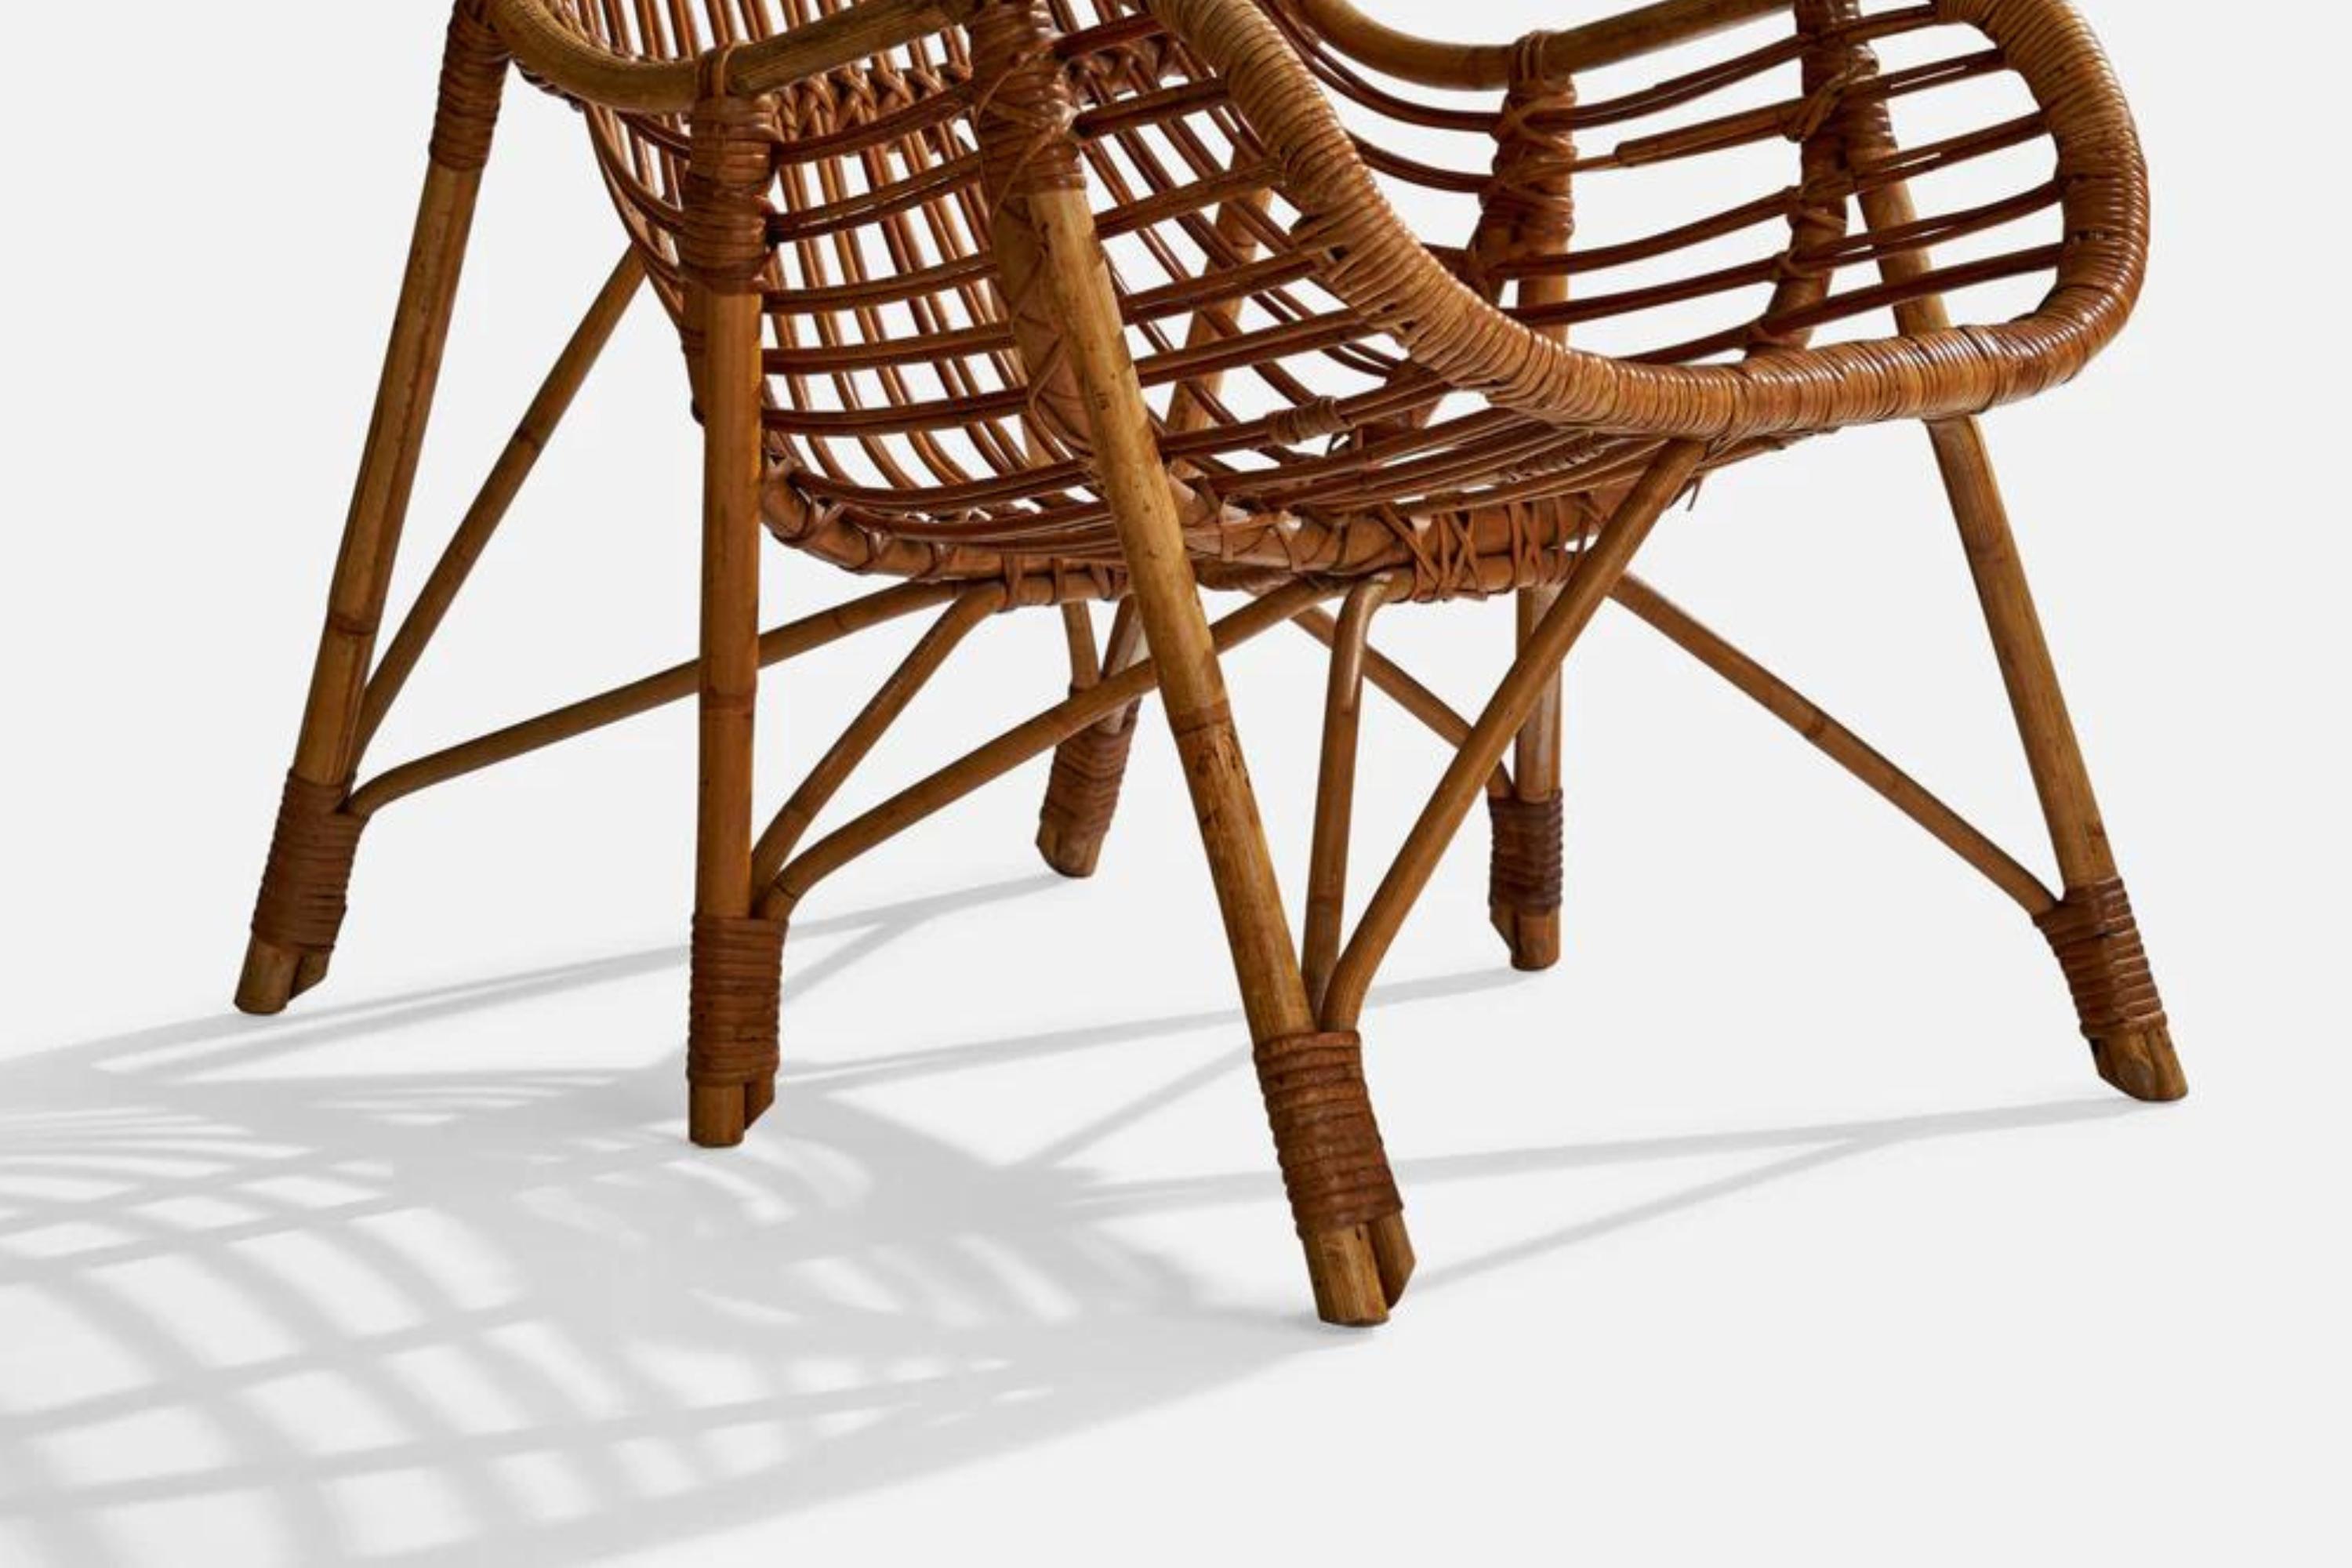 Finnish Designer, Lounge Chair, Bamboo, Rattan, Finland, 1940s For Sale 2